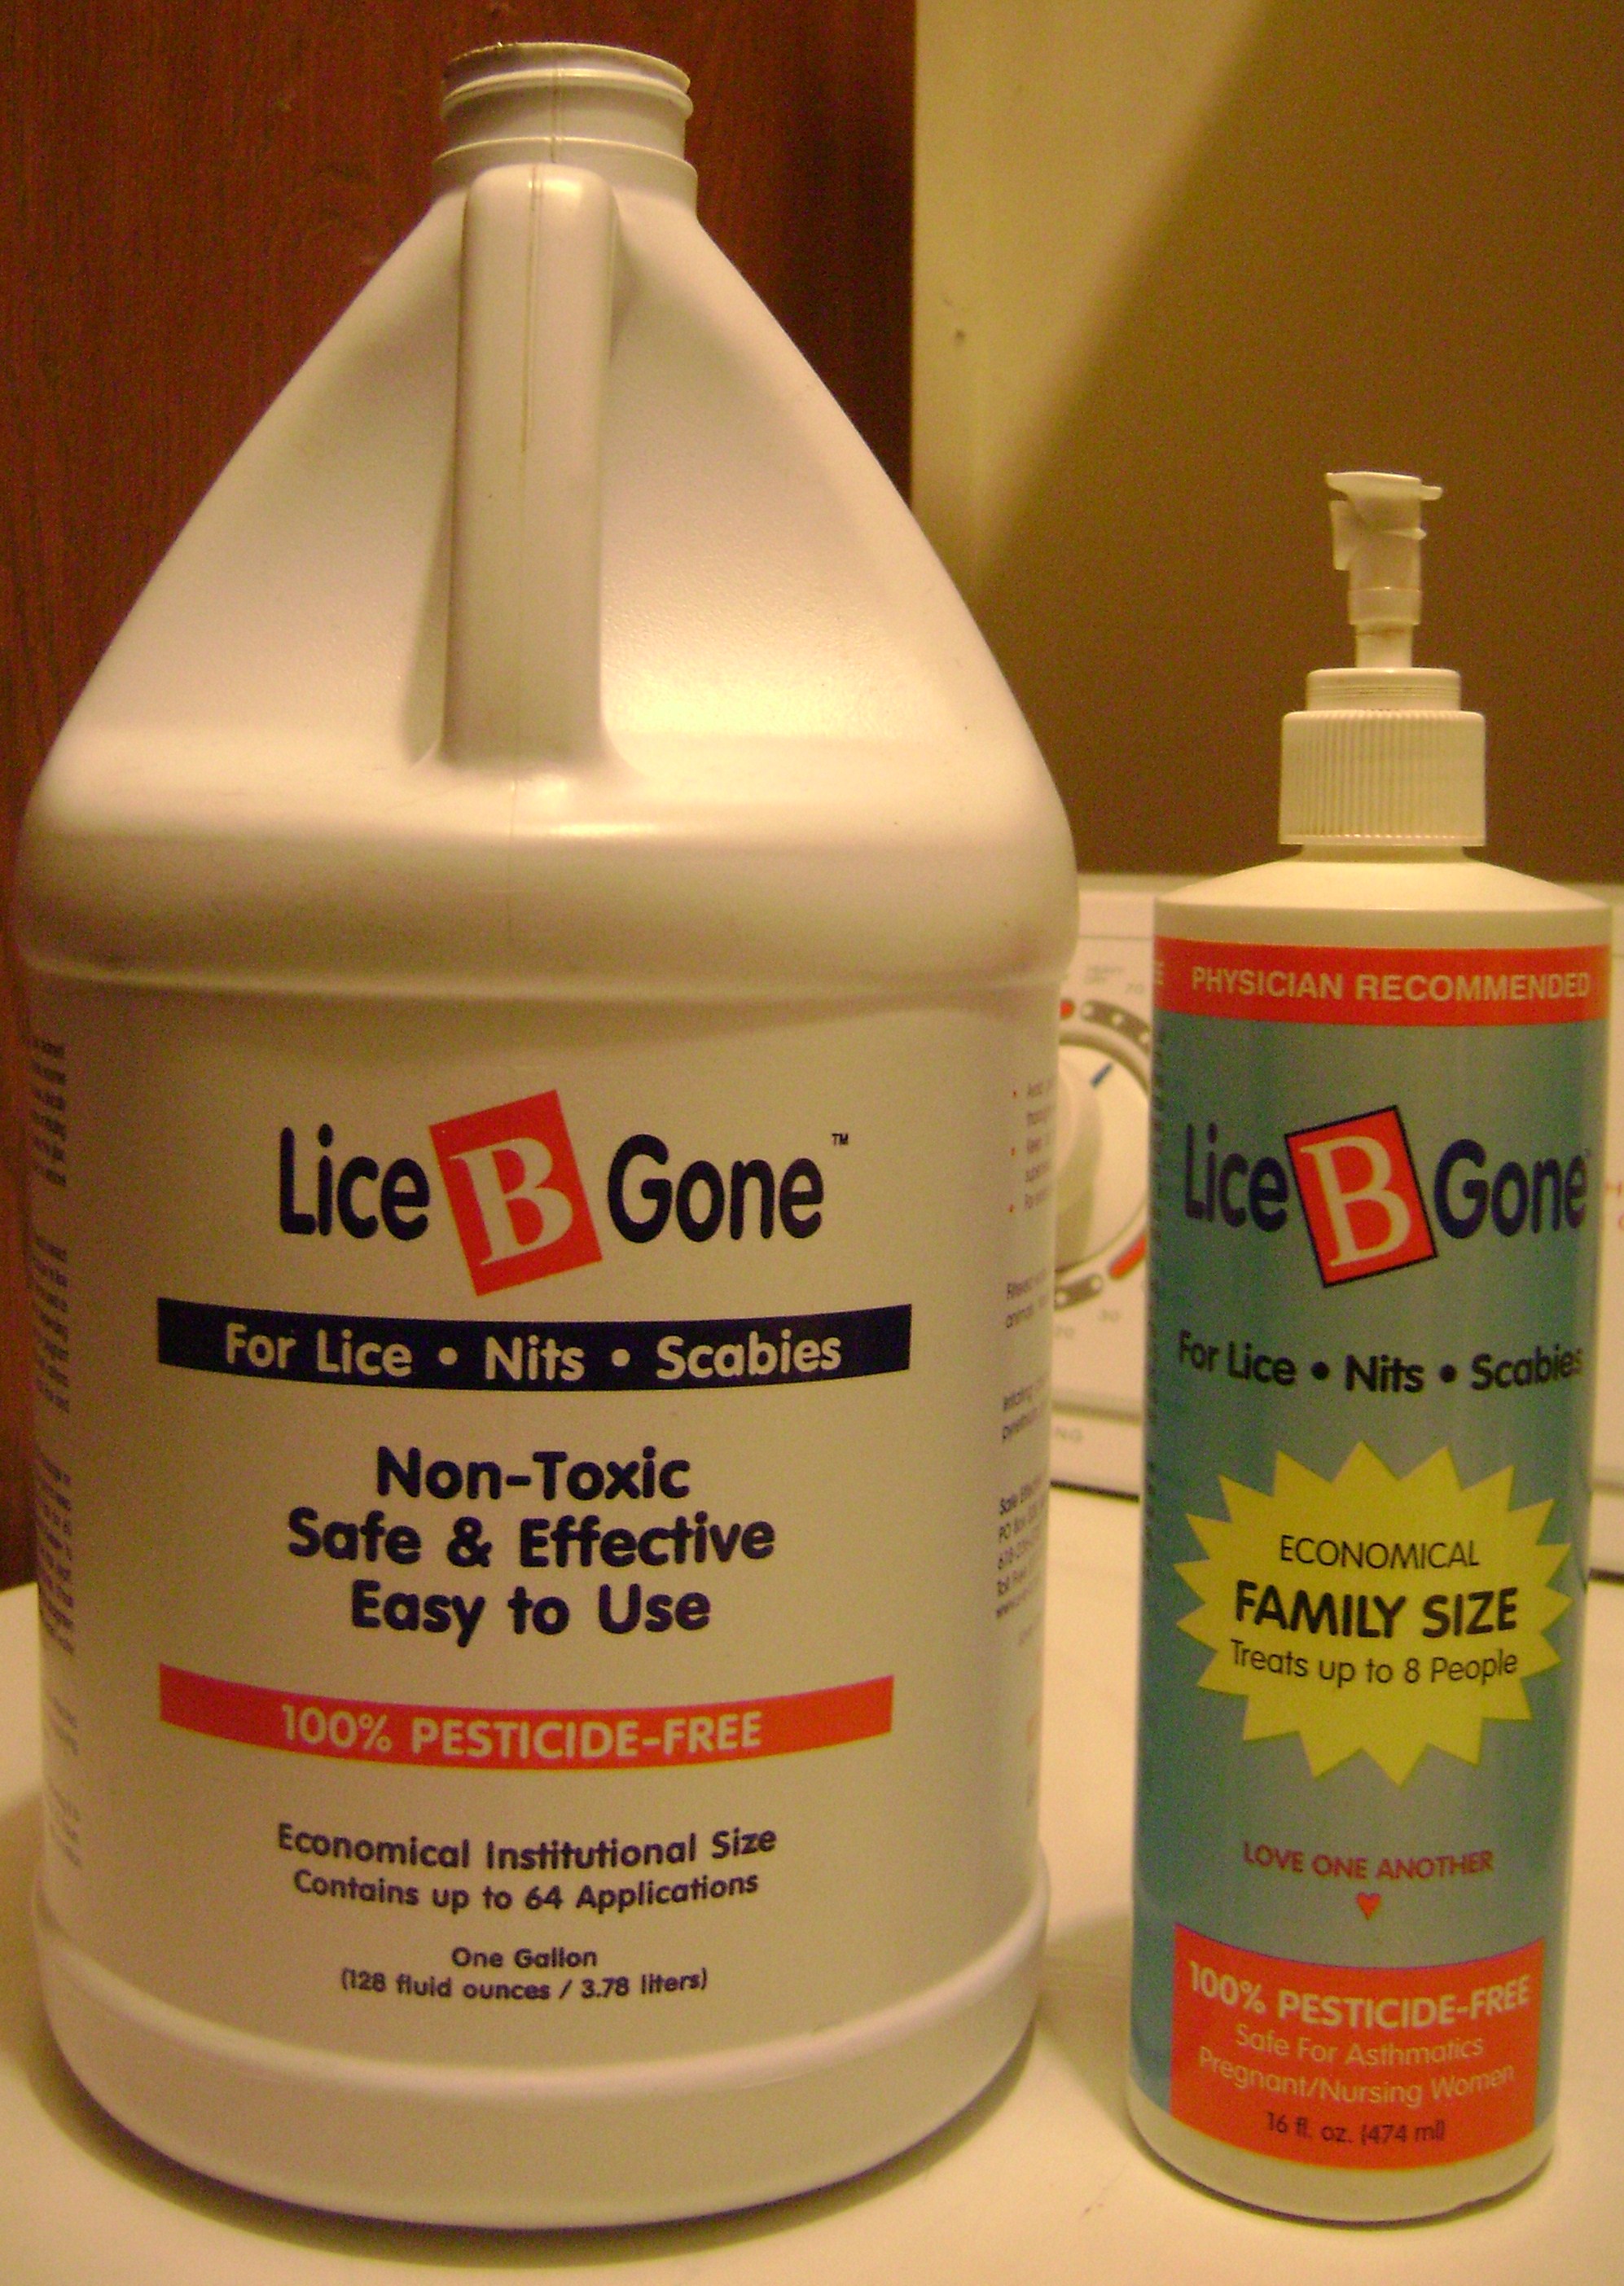 Get RID of SCABIES with LICE B GONE!!!